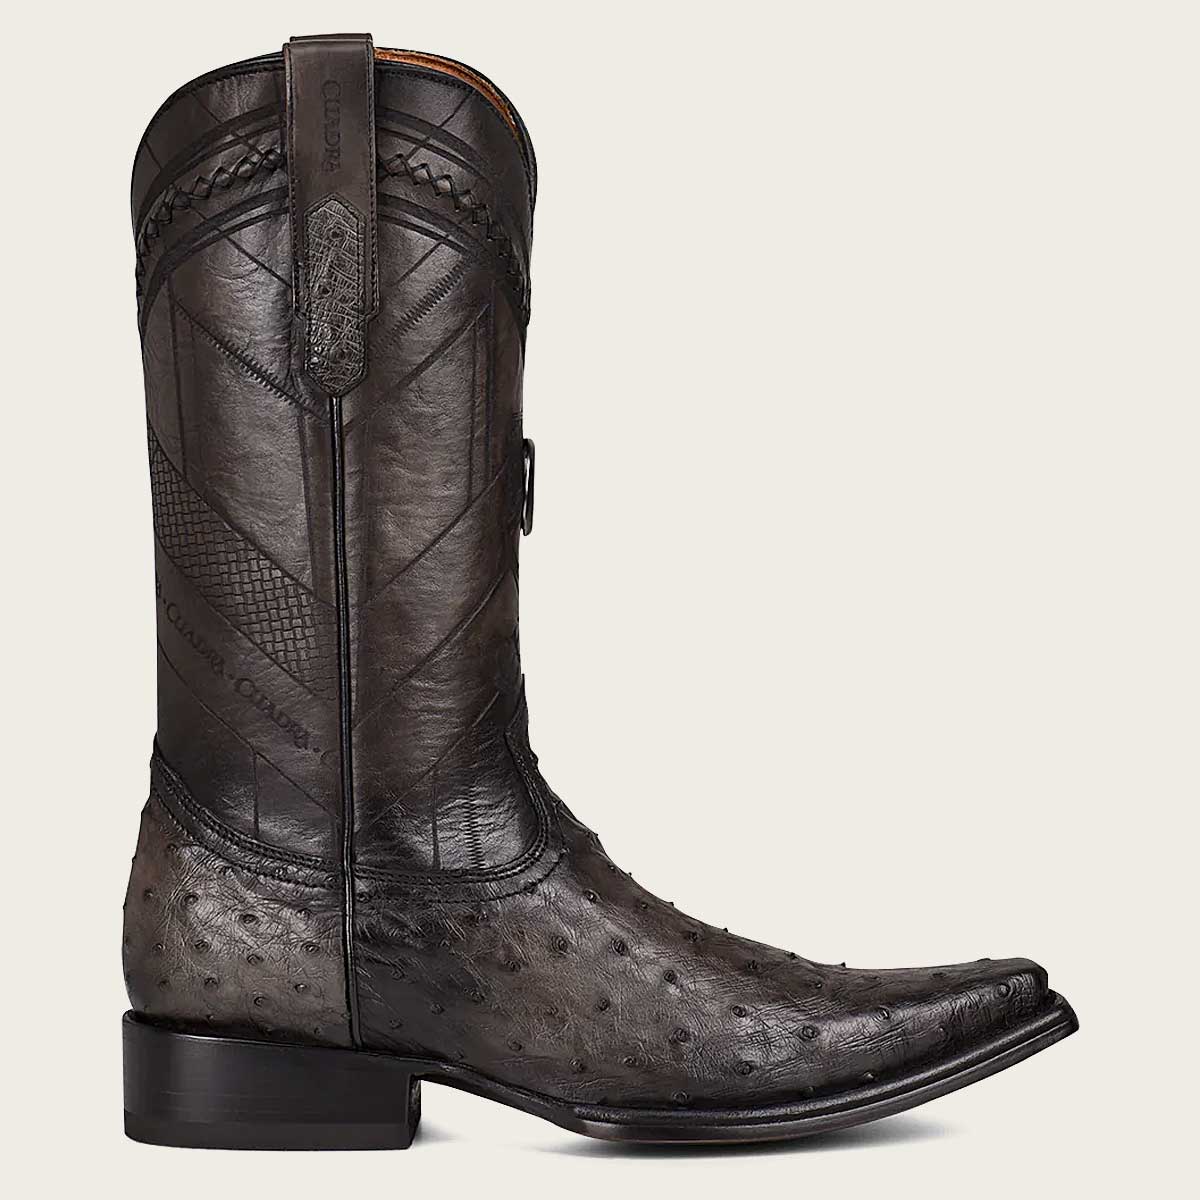 Our boots feature high-quality ostrich leather known for its distinct wide feather pattern, adding an element of exclusivity and luxury to their appearance.